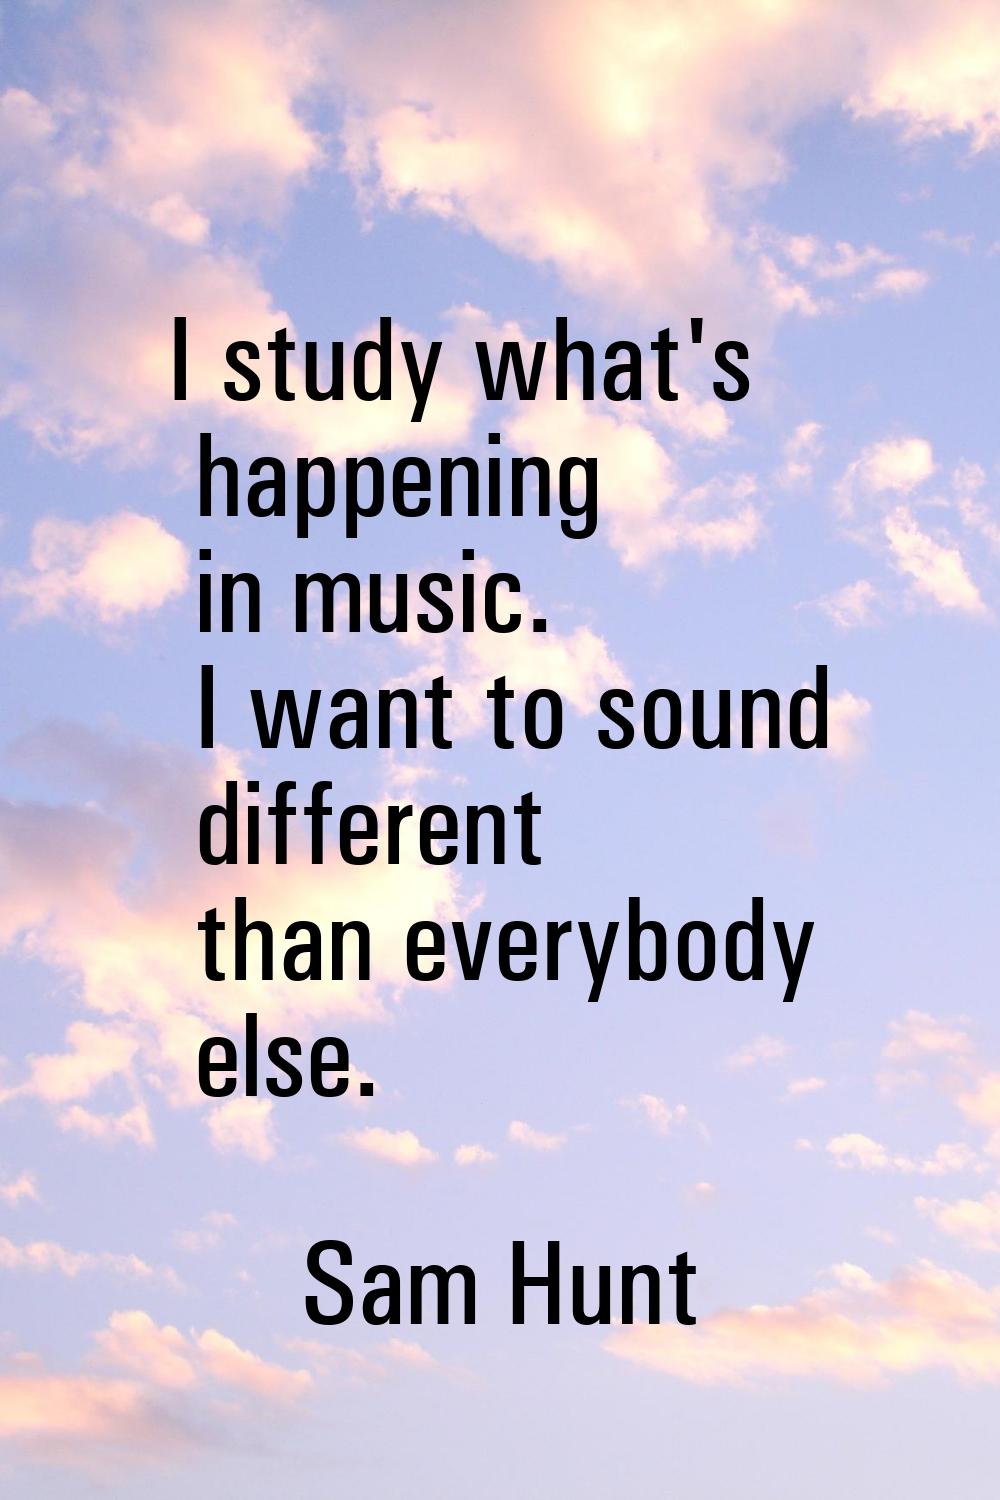 I study what's happening in music. I want to sound different than everybody else.